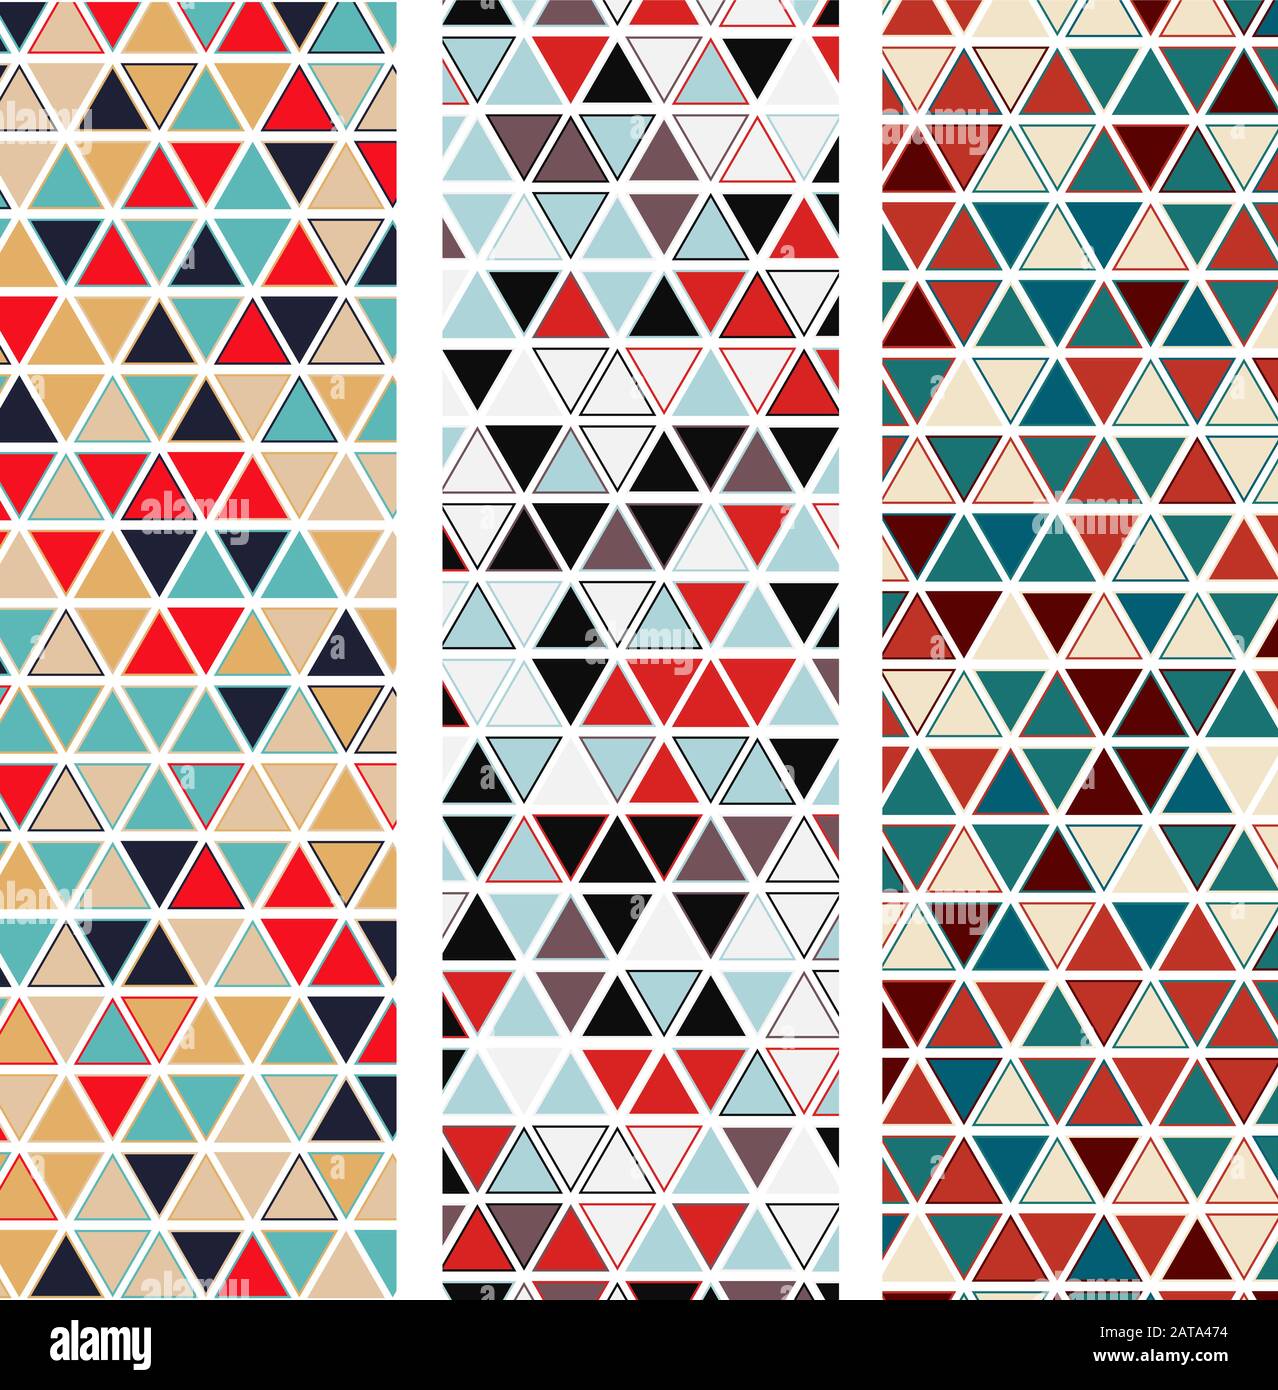 Vintage Graphic Pattern Set - Abstract Vector Old-Fashioned Print Stock Vector